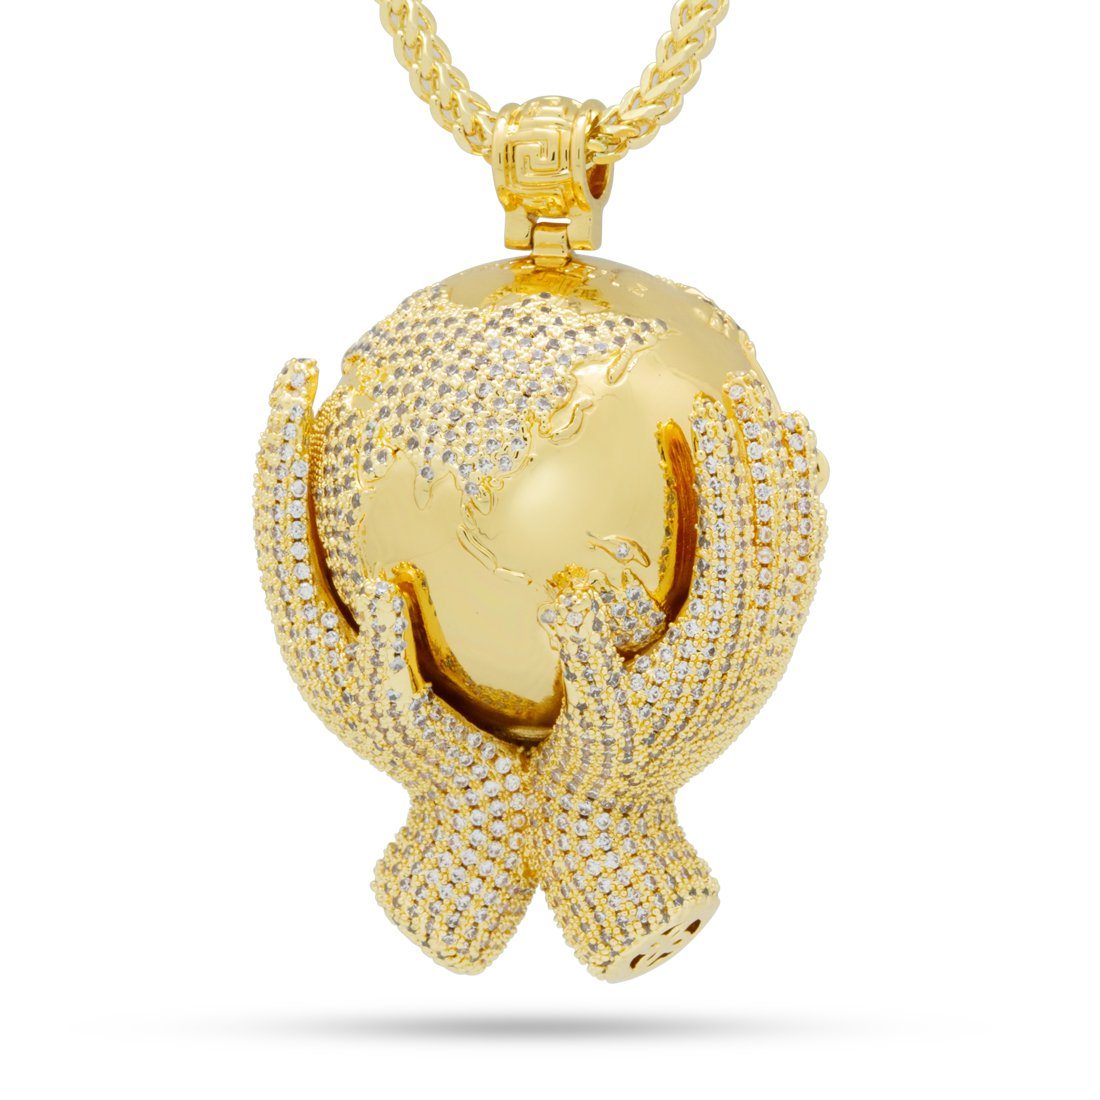 The Globe Necklace - Designed by Snoop Dogg x King Ice